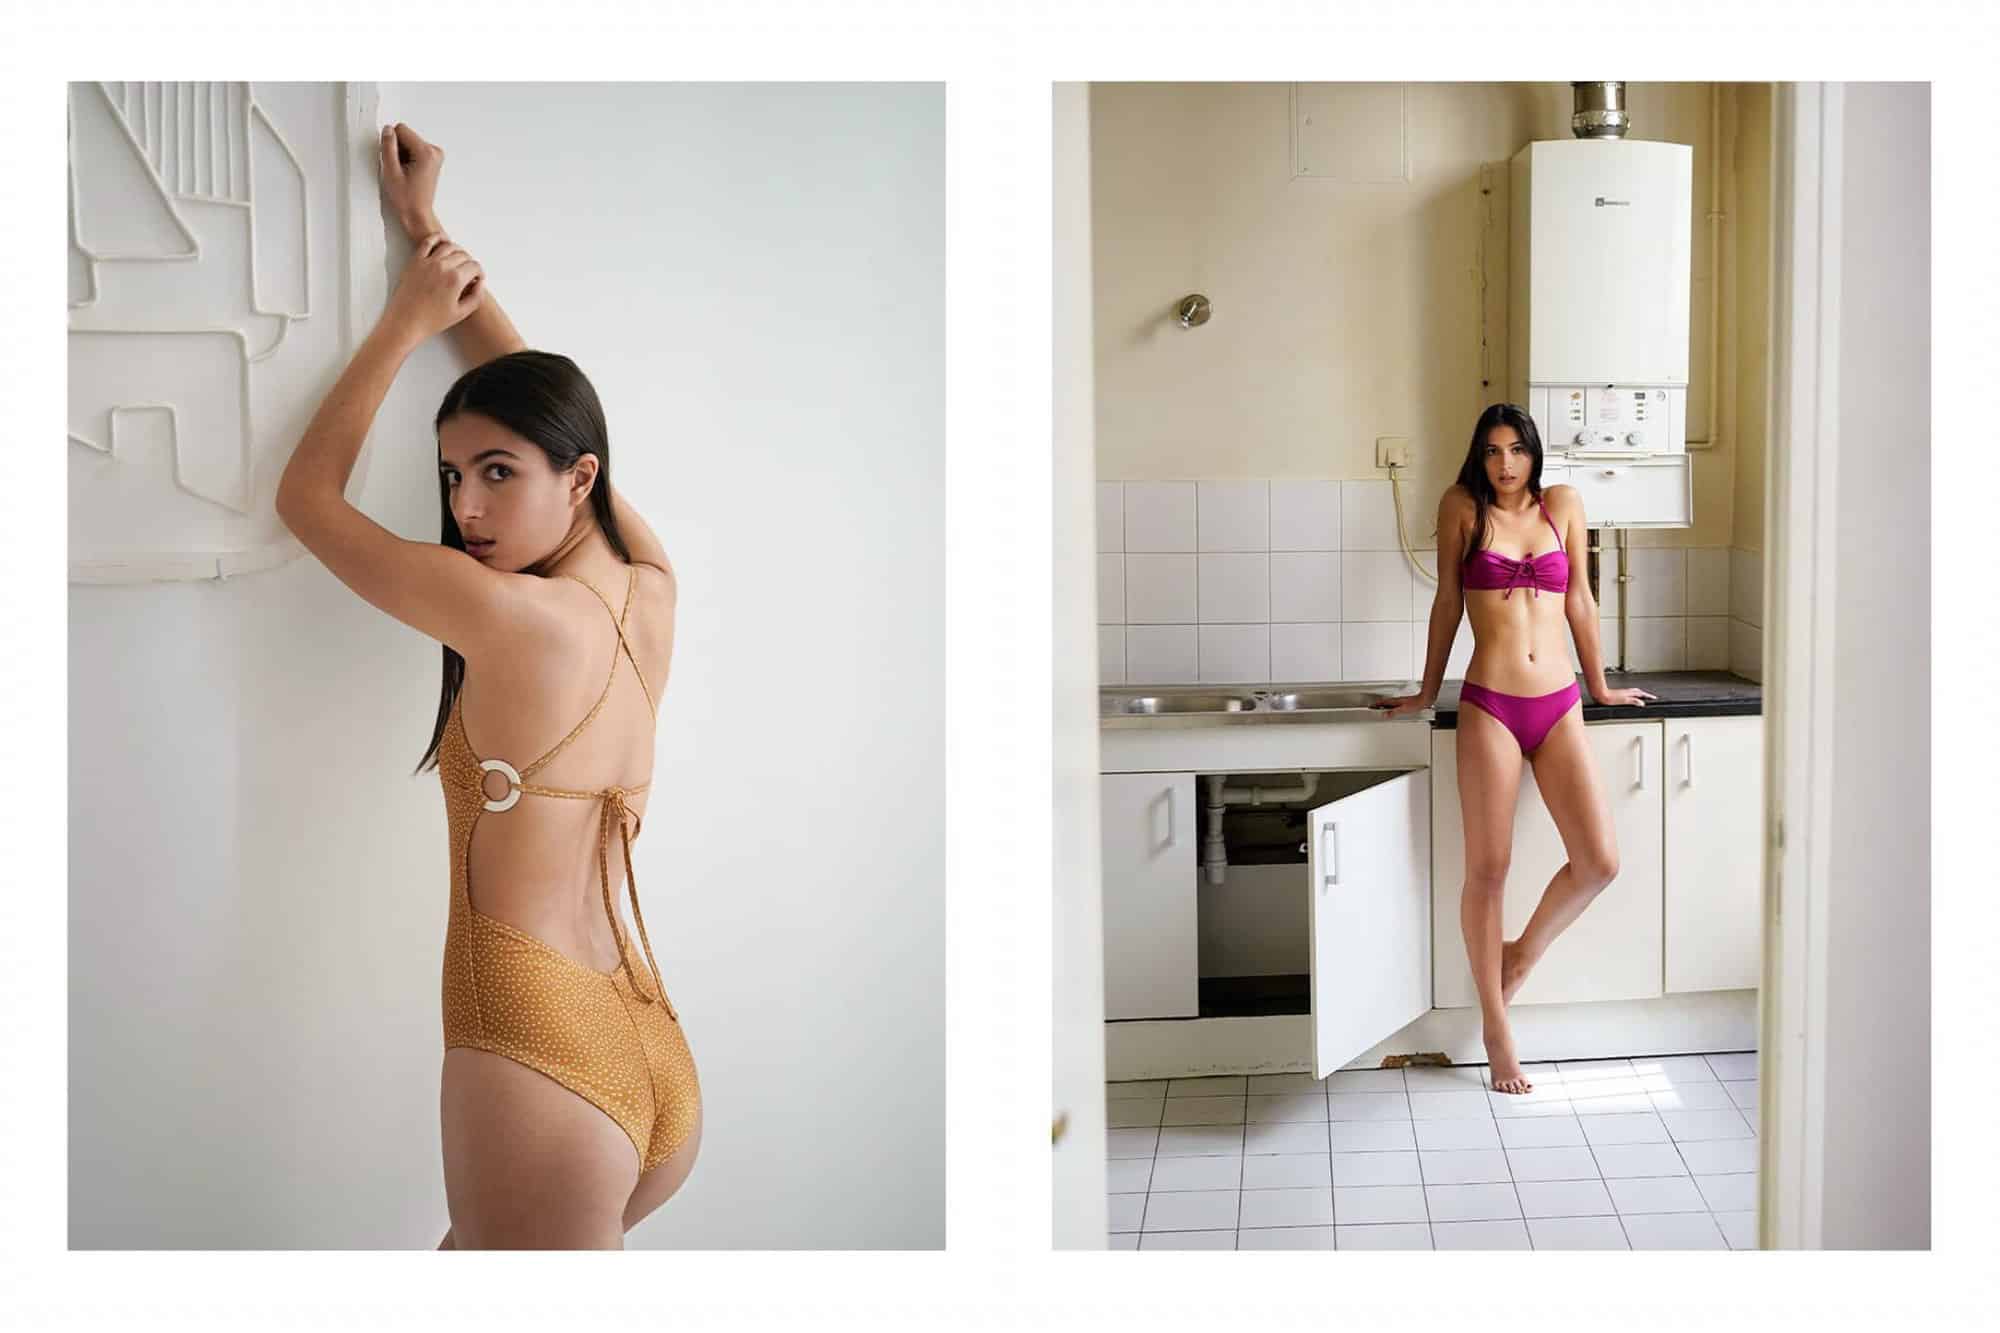 Left: a woman leaning against a white wall looking over her shoulder at the viewer wearing a gold and white polka dot one-piece swimsuit by Yasmine Eslami. Right: a woman leaning on the counter of an empty kitchen wearing a fuchsia bikini by Yasmine Eslami. 